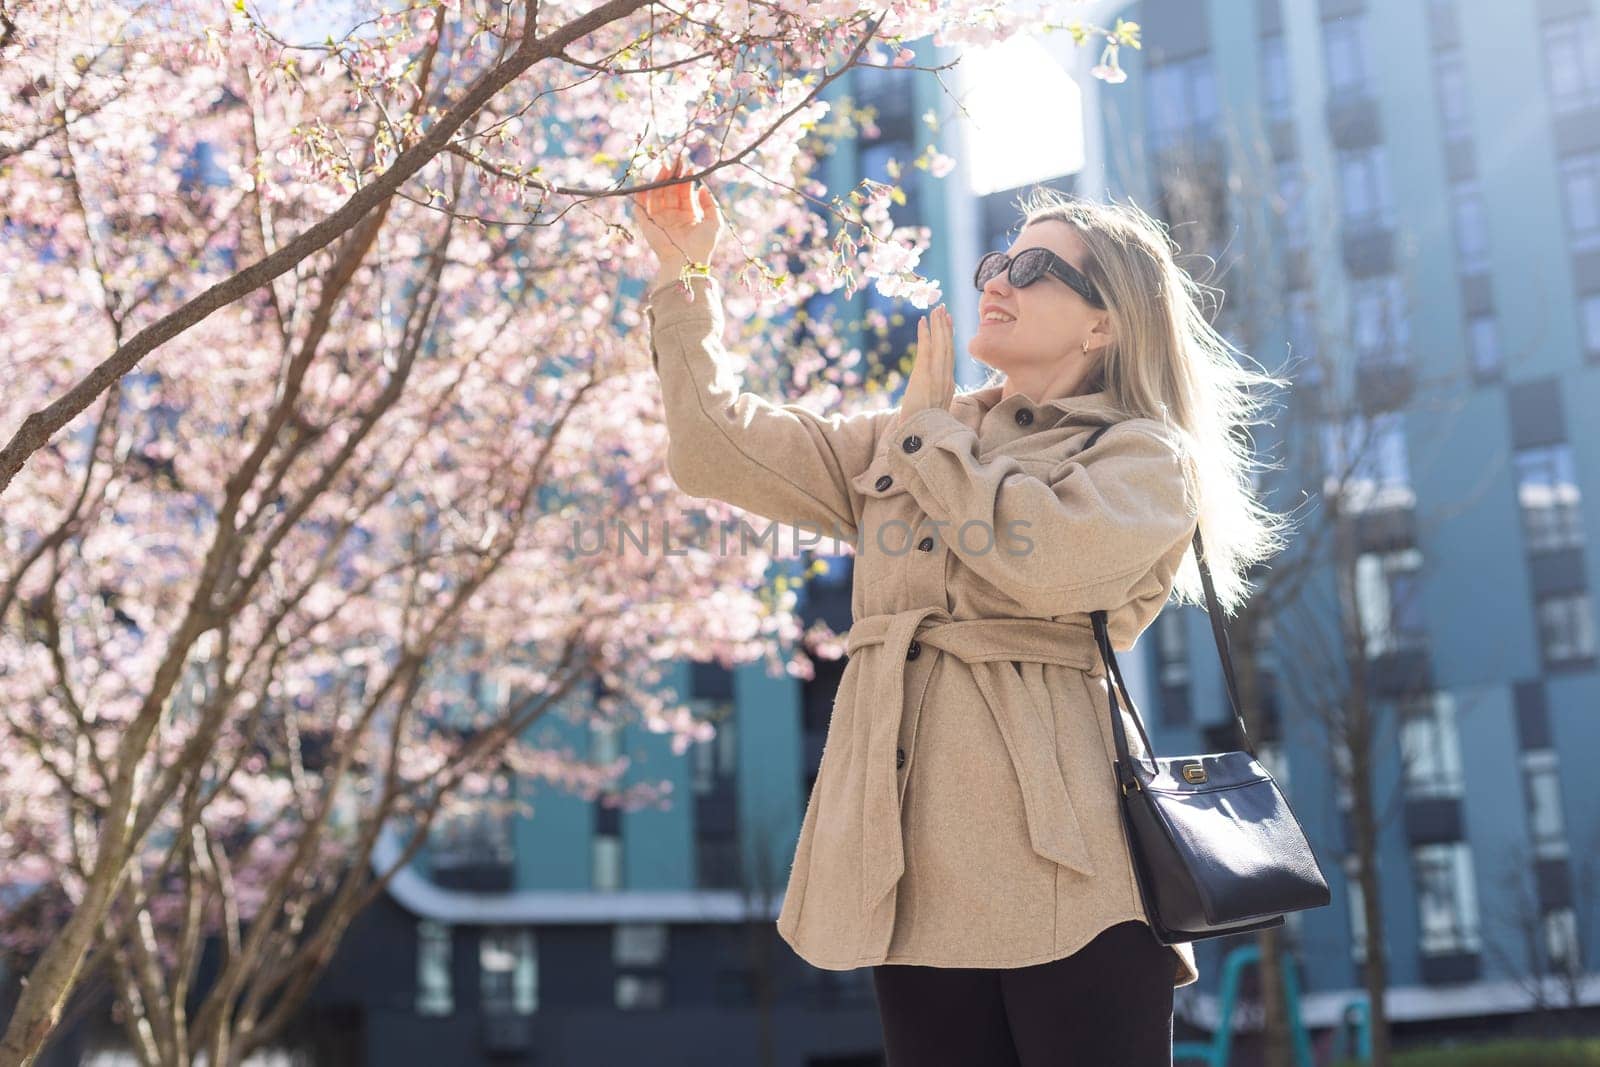 Sakura branches with flowers on a tree on the city streets. Happy woman girl in a gray palette walks along an alley with blooming sakura. Gorgeous fancy girl outdoors. Sakura tree blooming. High quality photo